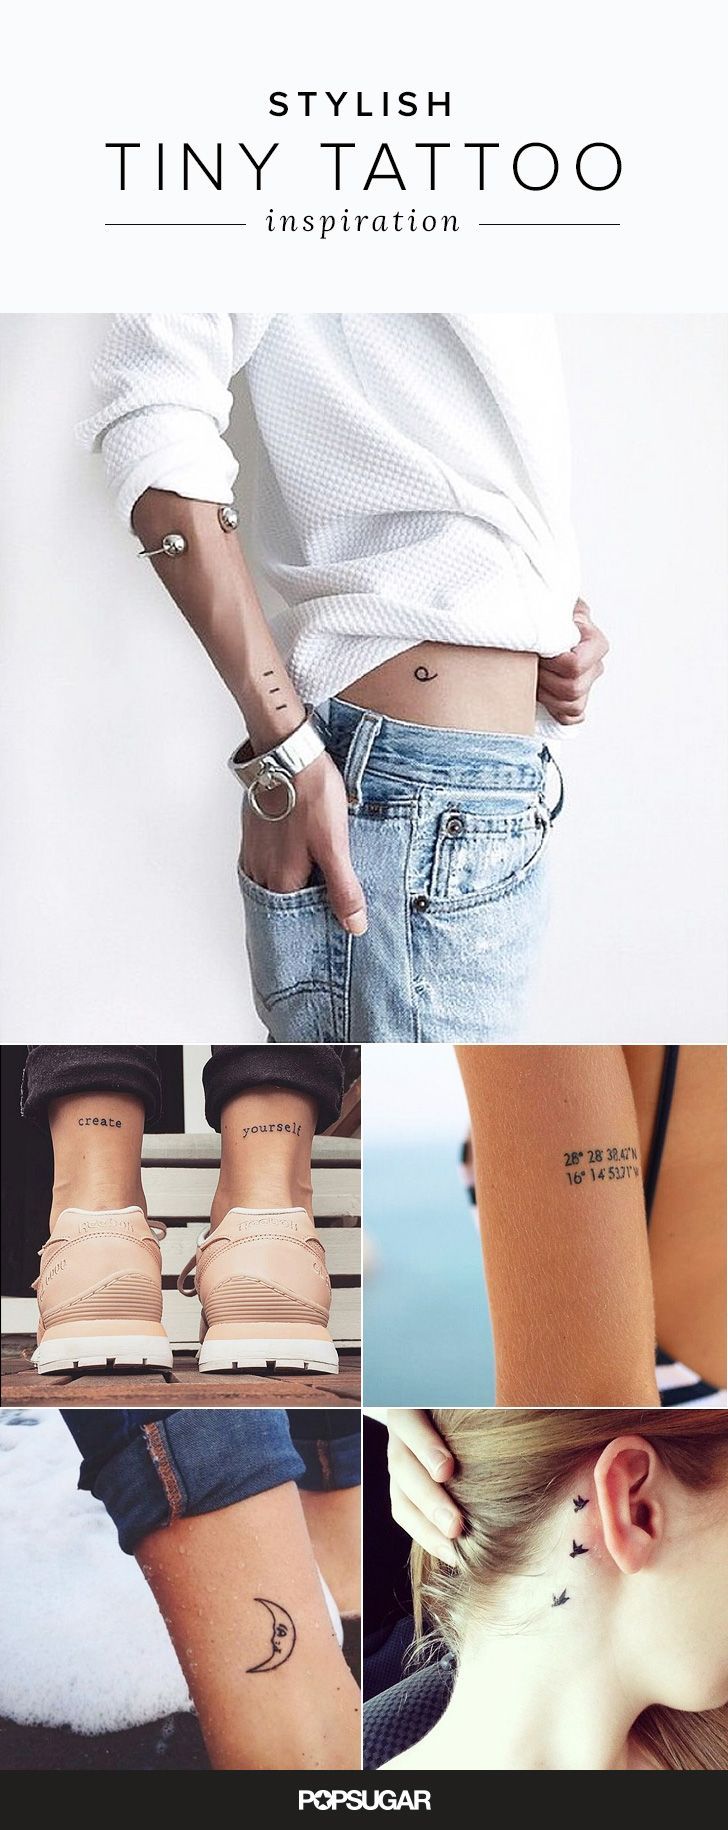 Looking for tiny tattoo inspiration? Look no further.